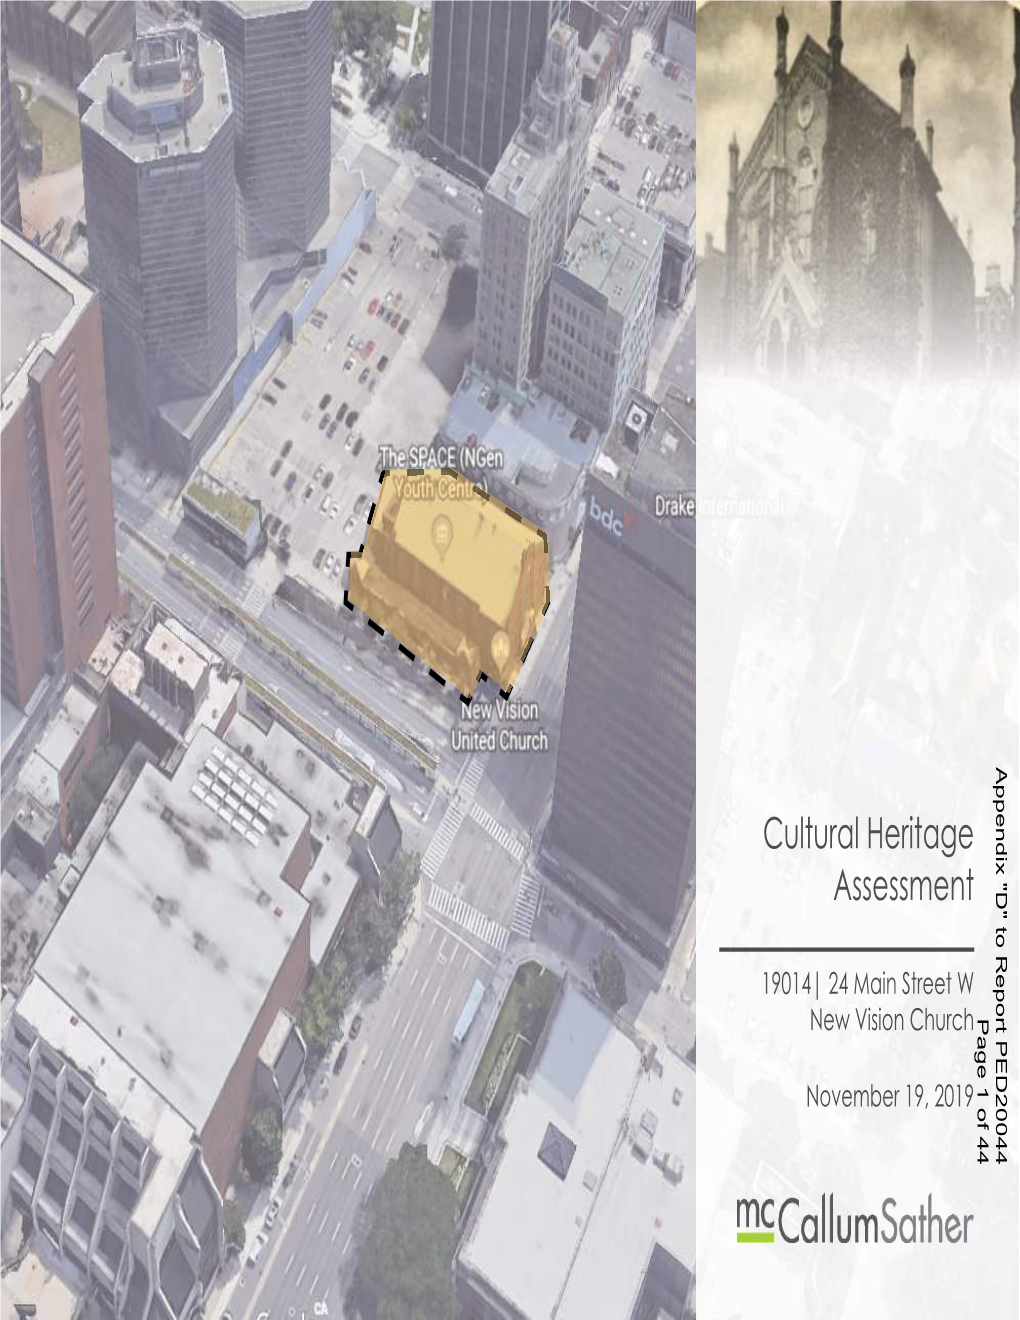 Cultural Heritage Assessment "D" to Report 19014| 24 Main Street W